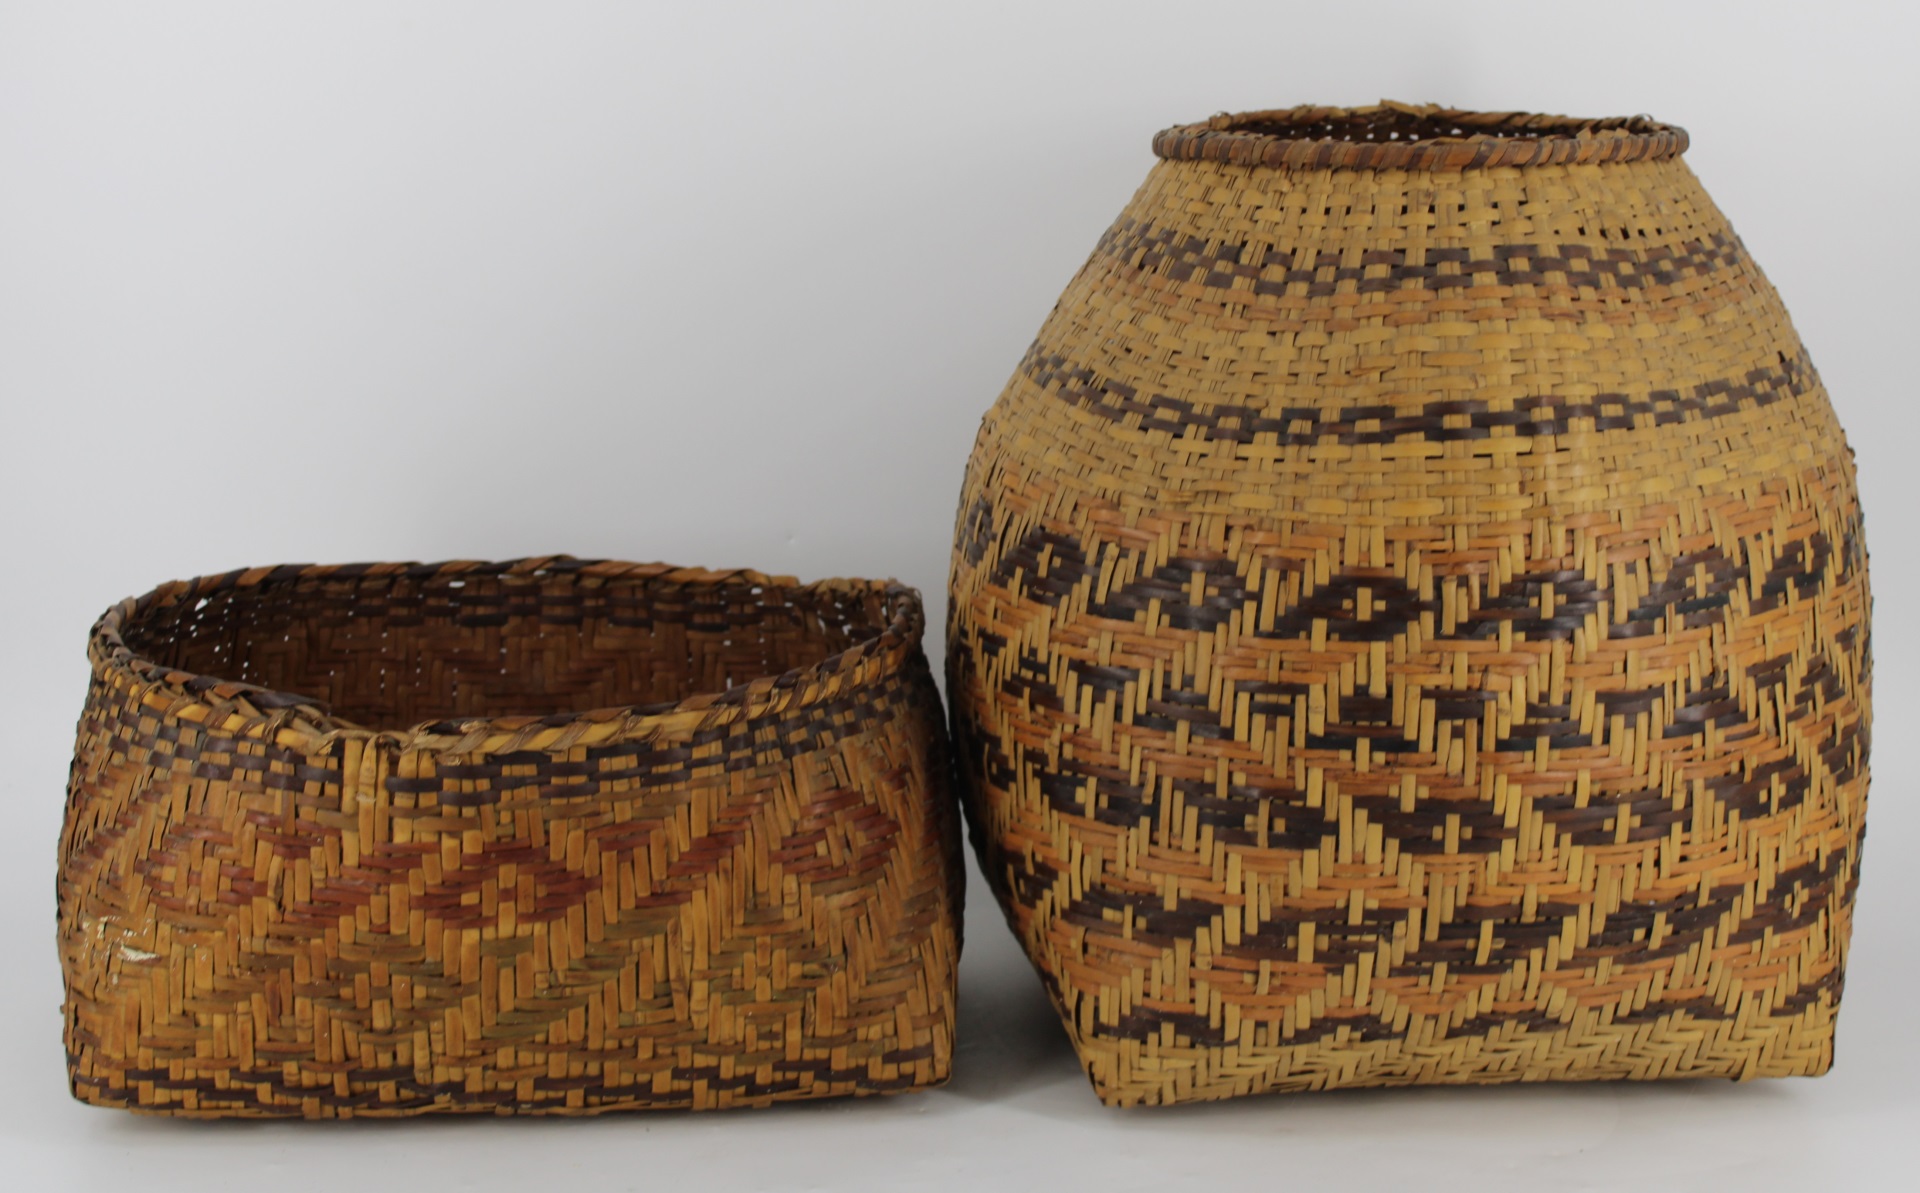 2 CHEROKEE WOVEN BASKETS. From